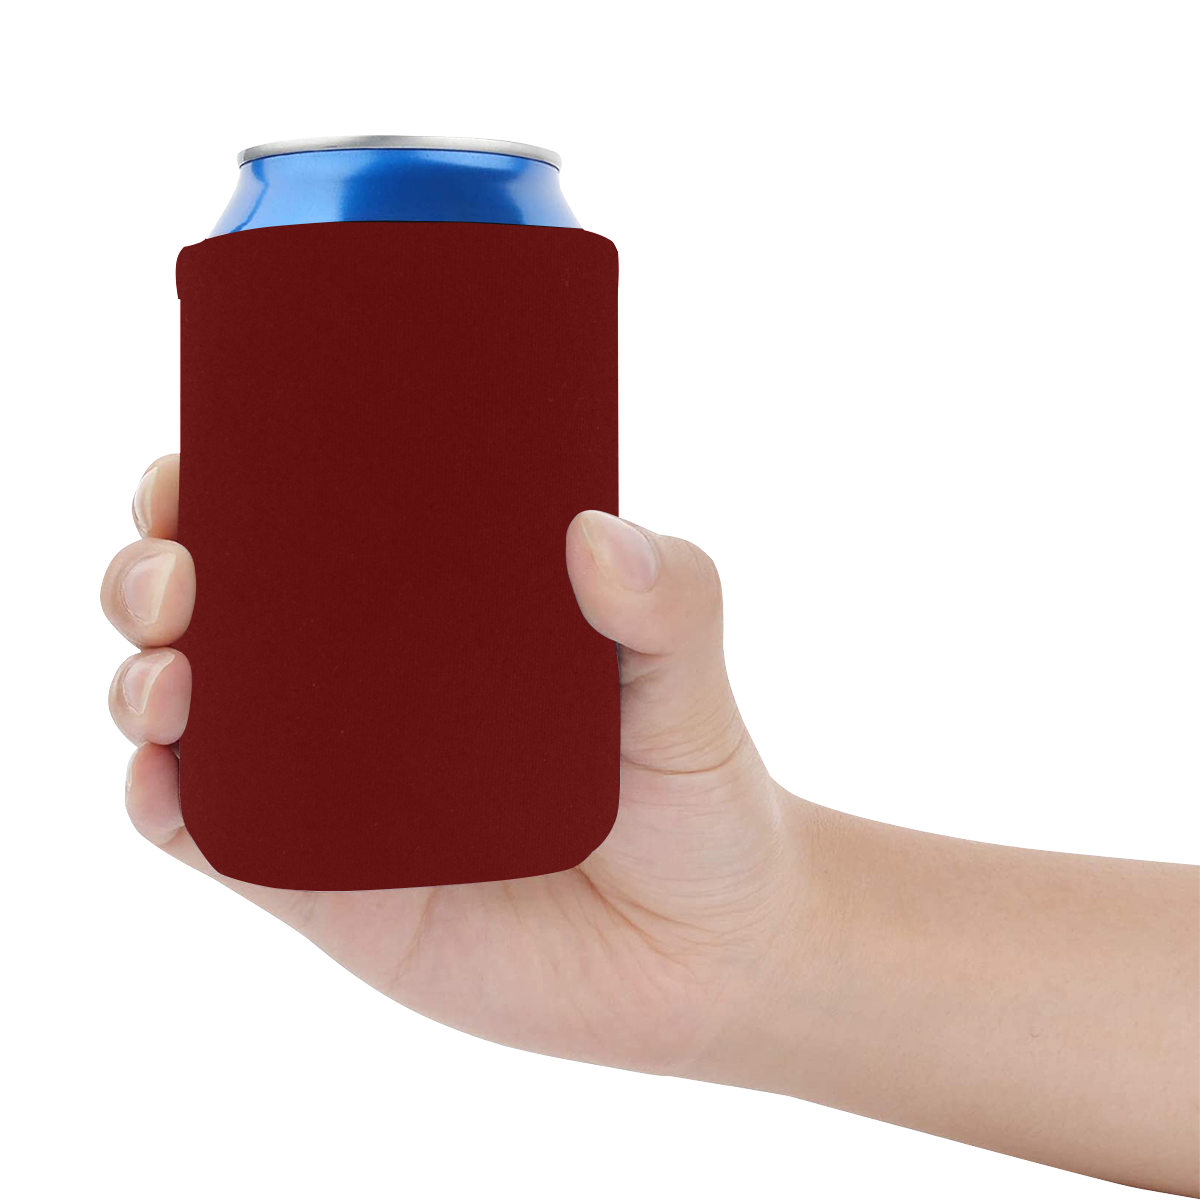 color blood red Neoprene Can Cooler 4" x 2.7" dia.